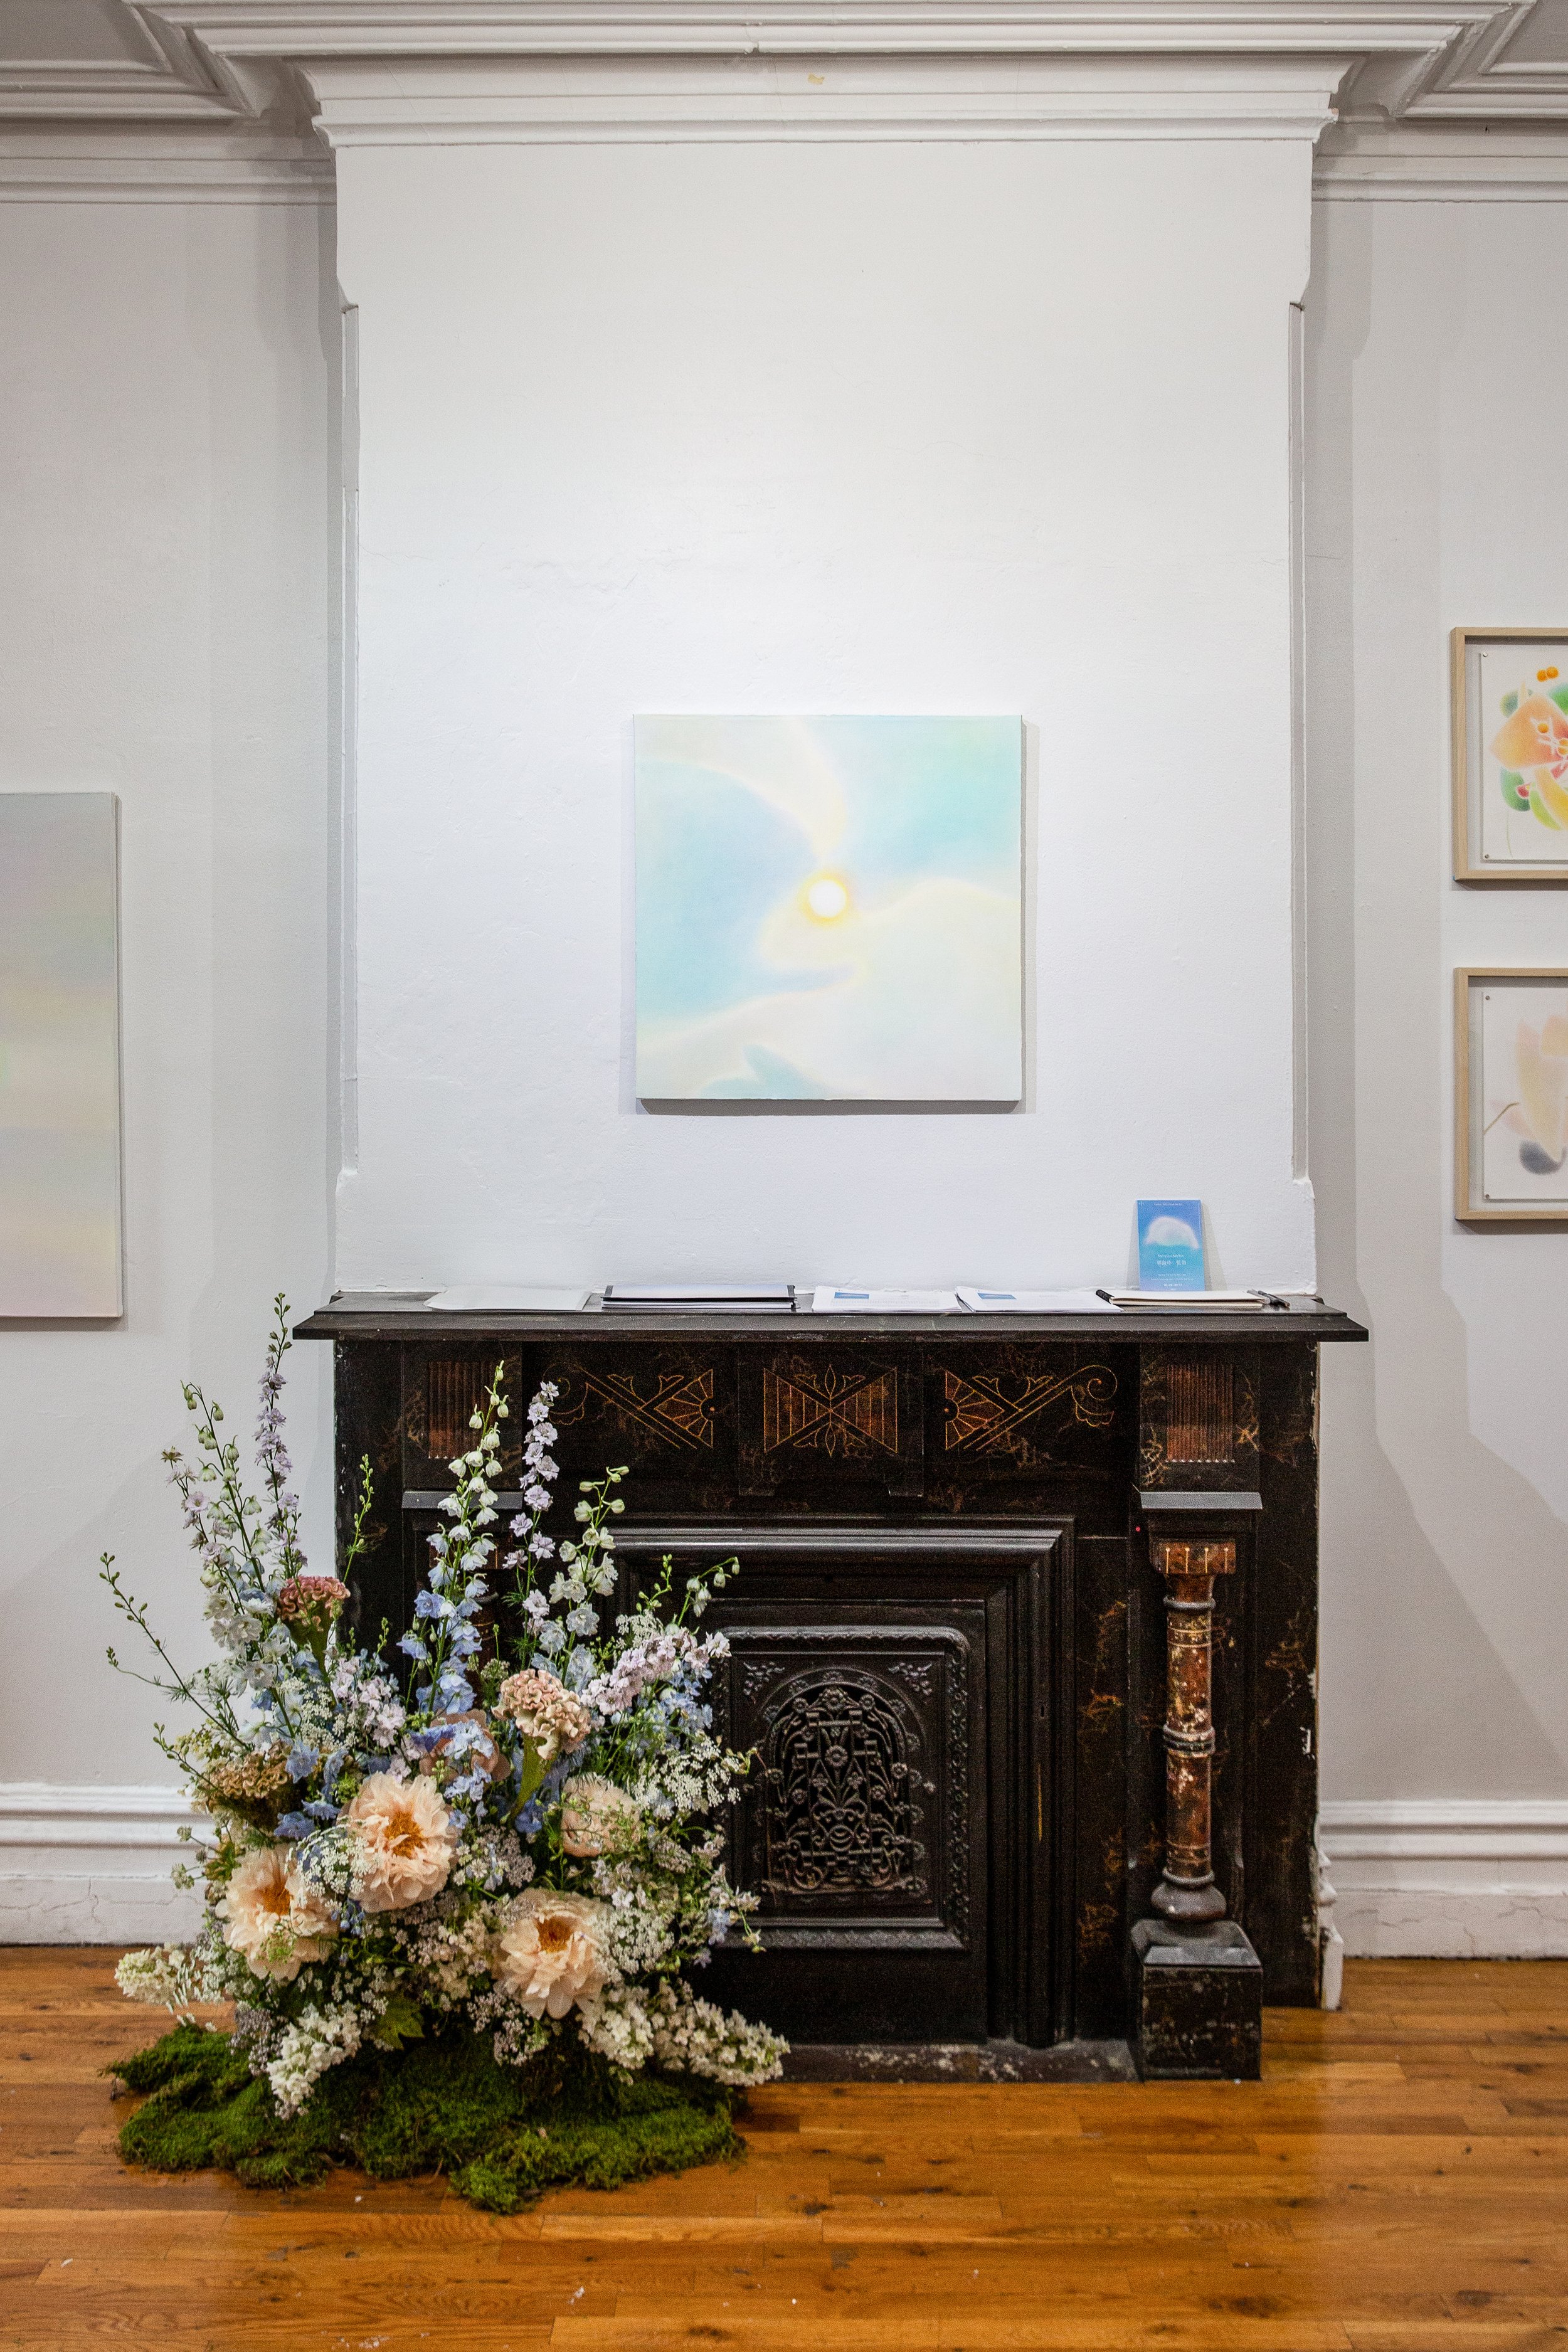  Installation view of Shuling Guo: Sotto Voce. Flower art by Ye Zi. Photo by Lynn Hai ©Shuling Guo, courtesy of Fou Gallery 